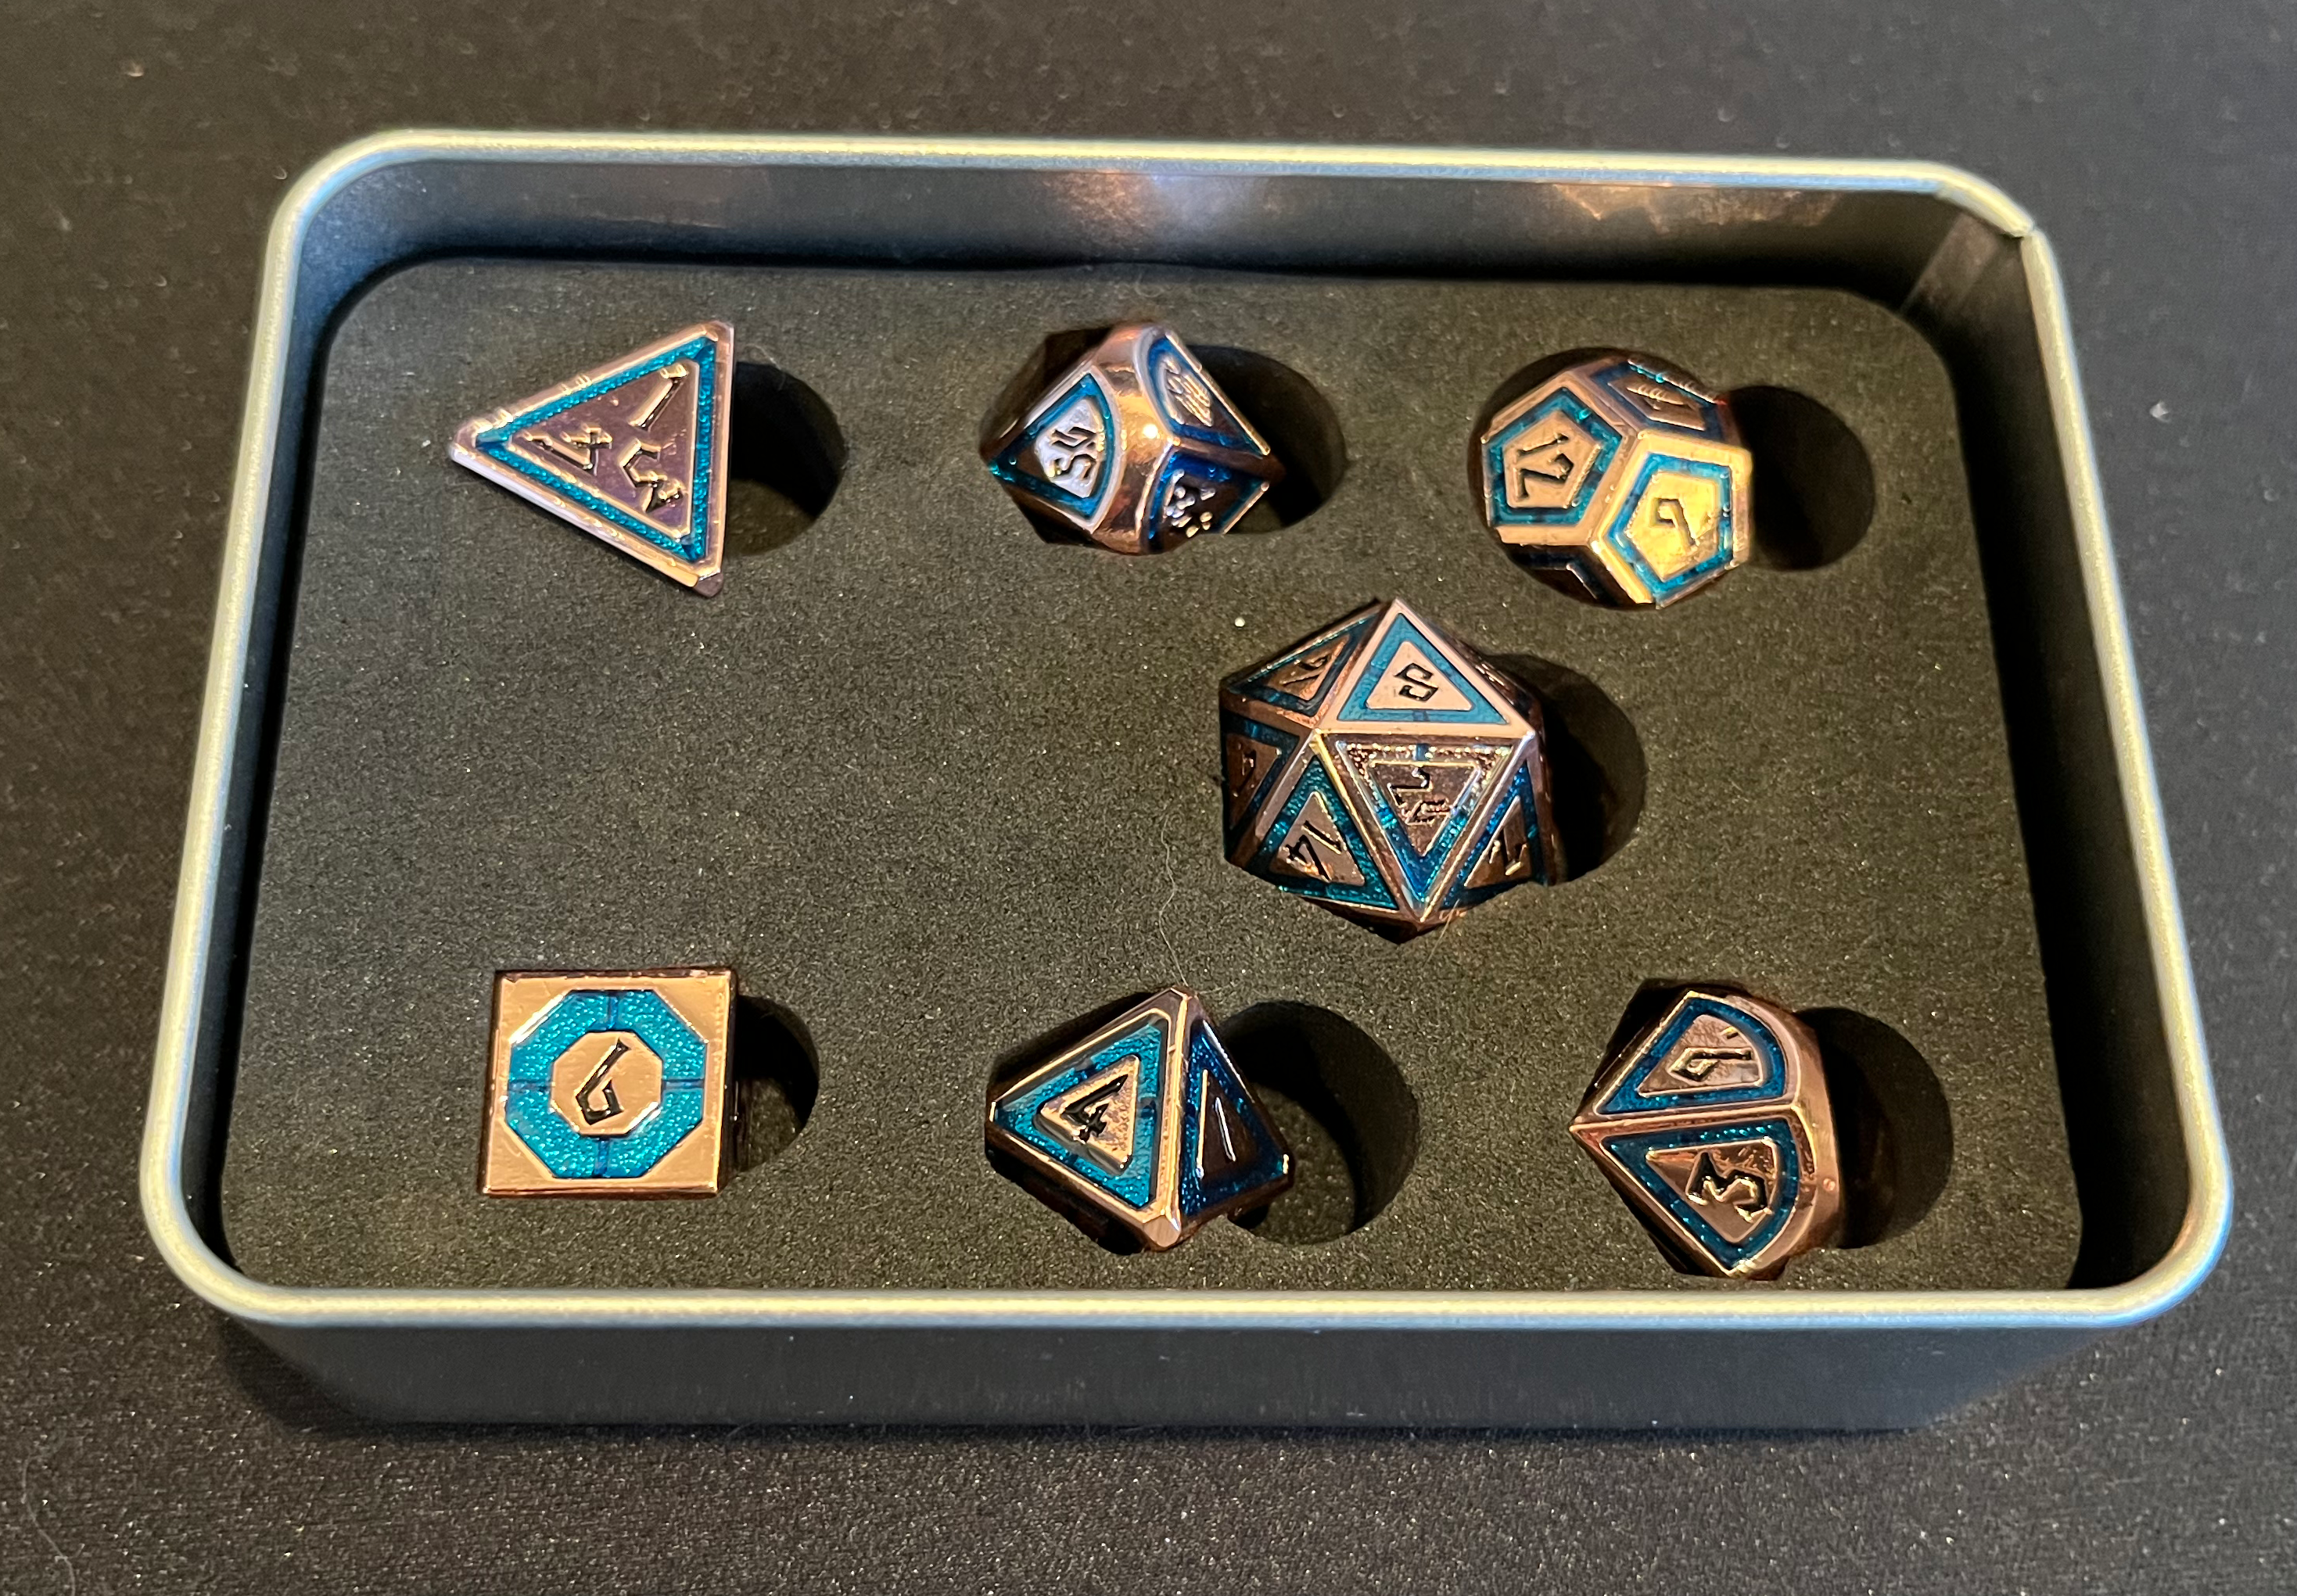 The metal dice, arrayed in an opened storage case, showing how they fit relatively neatly into purpose-cut holes in a foam pad.